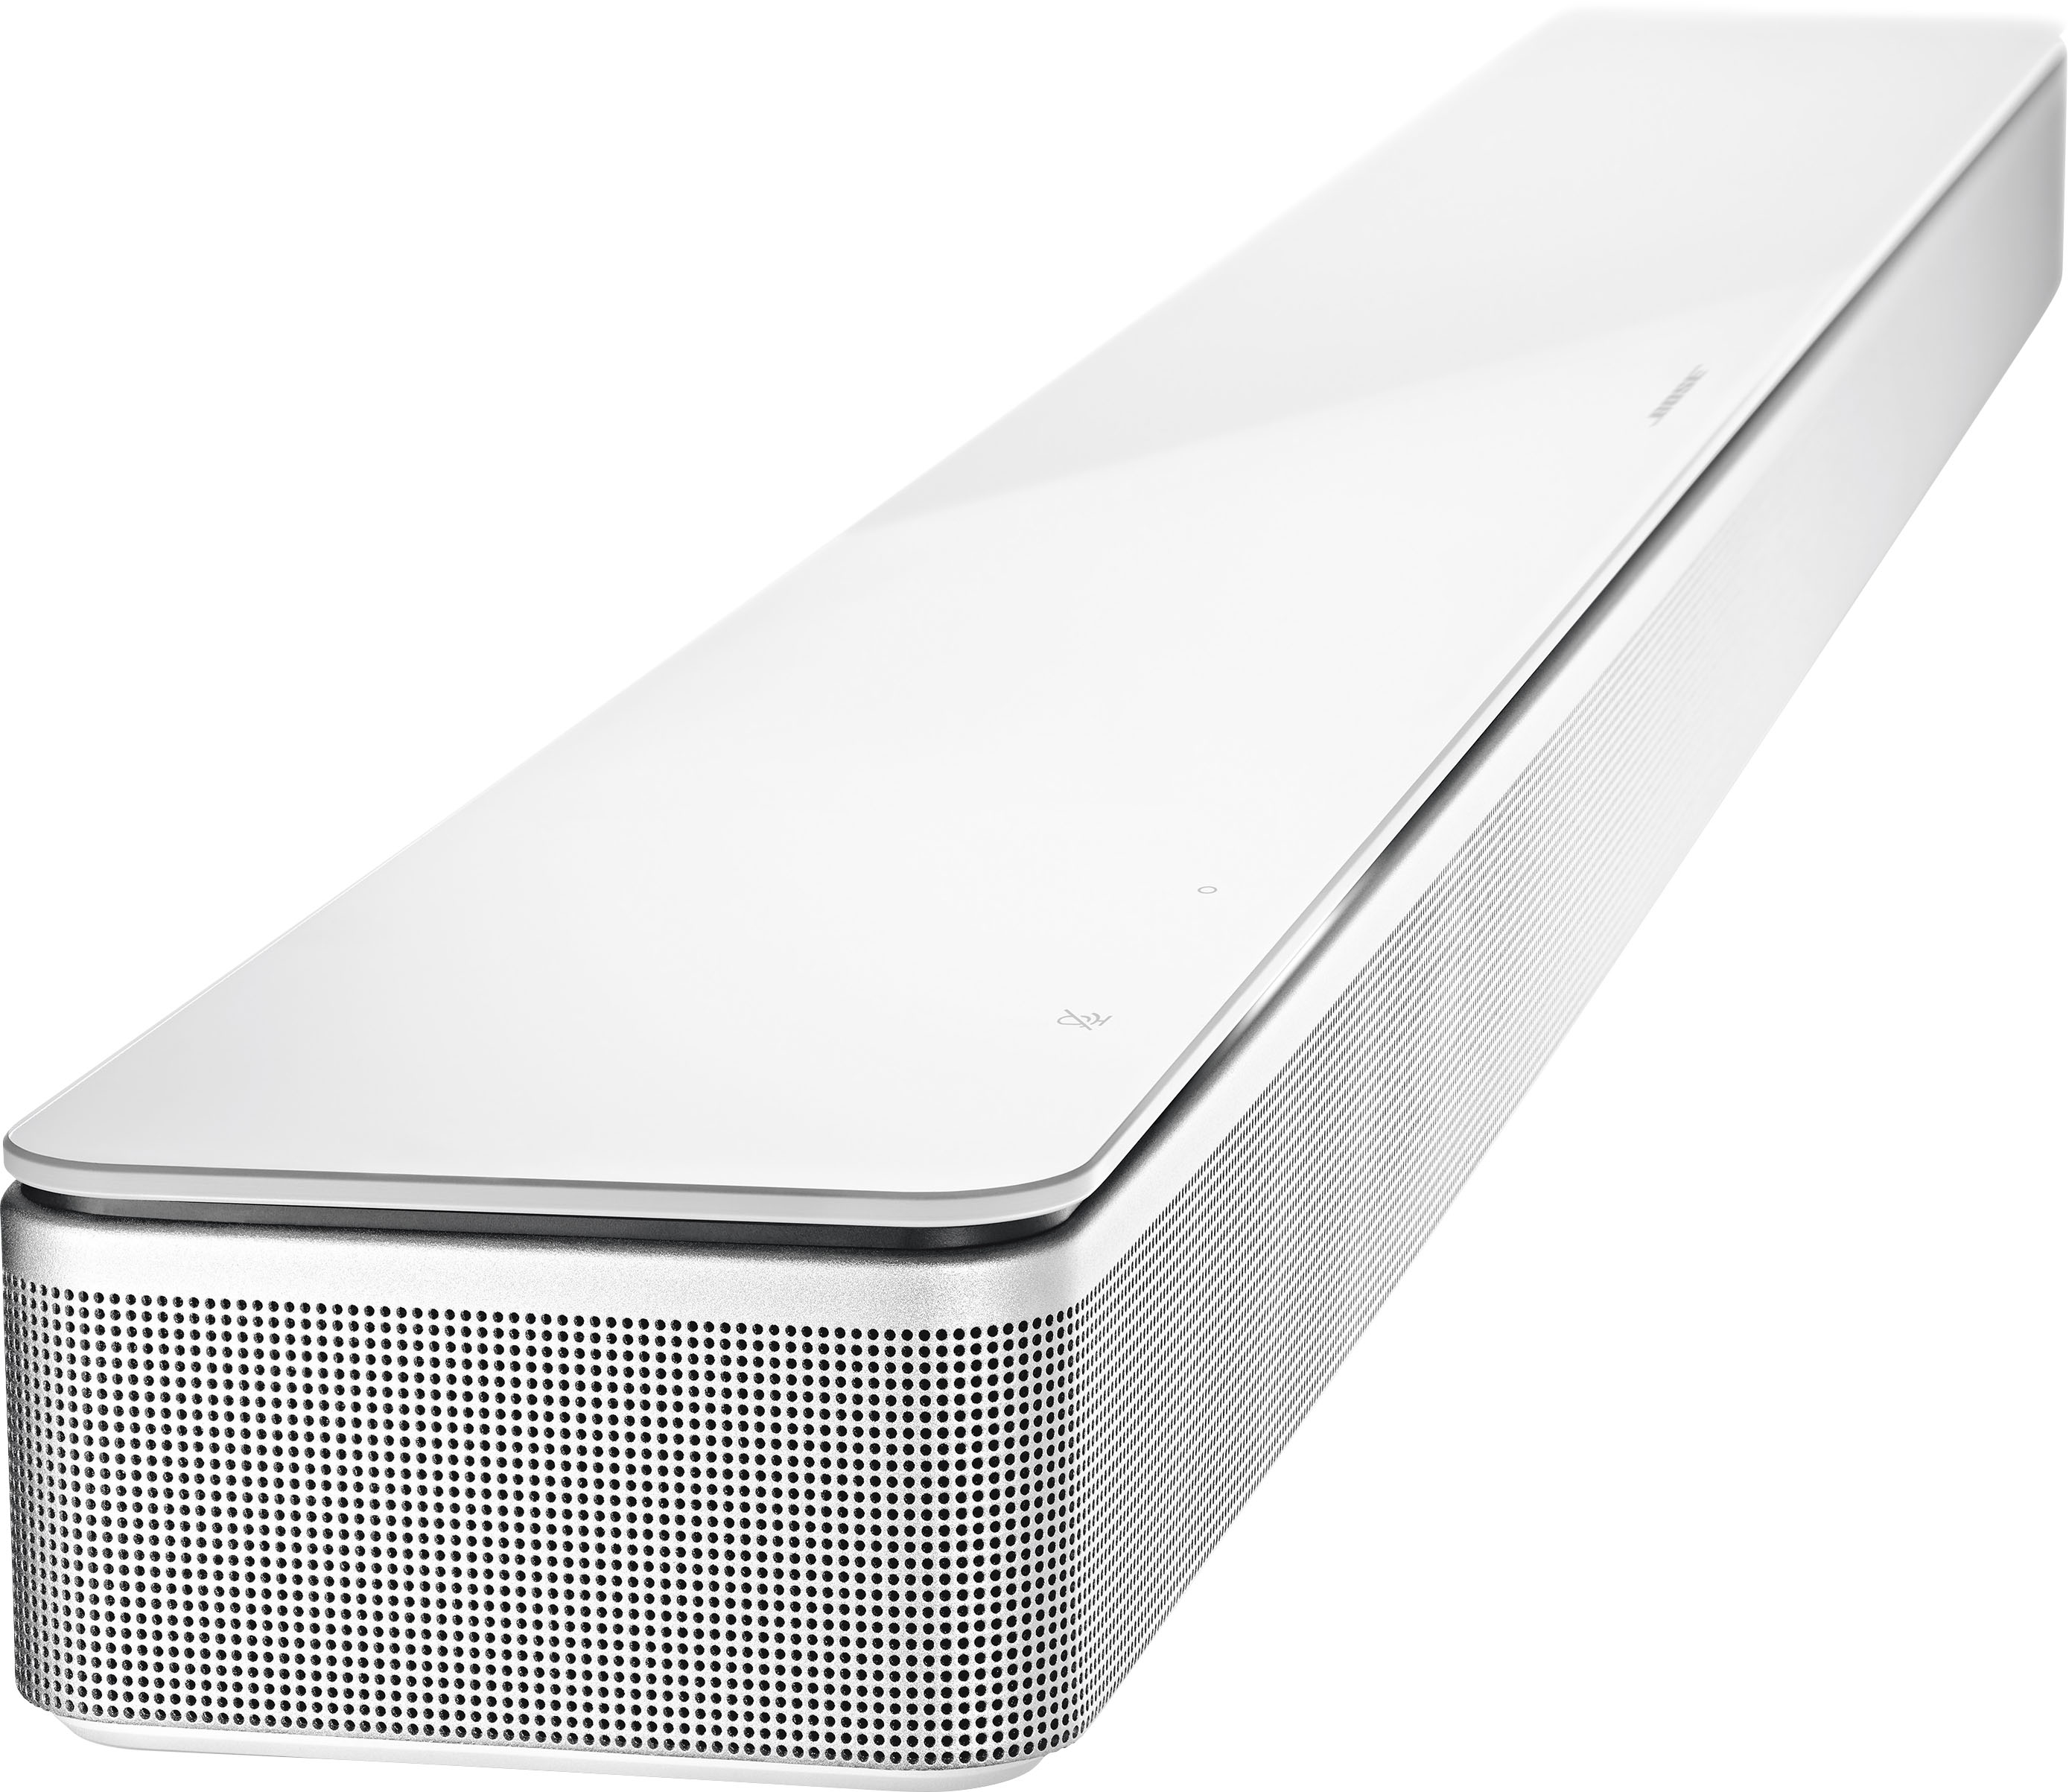 Questions and Answers: Bose Smart Soundbar 700 with Voice Assistant